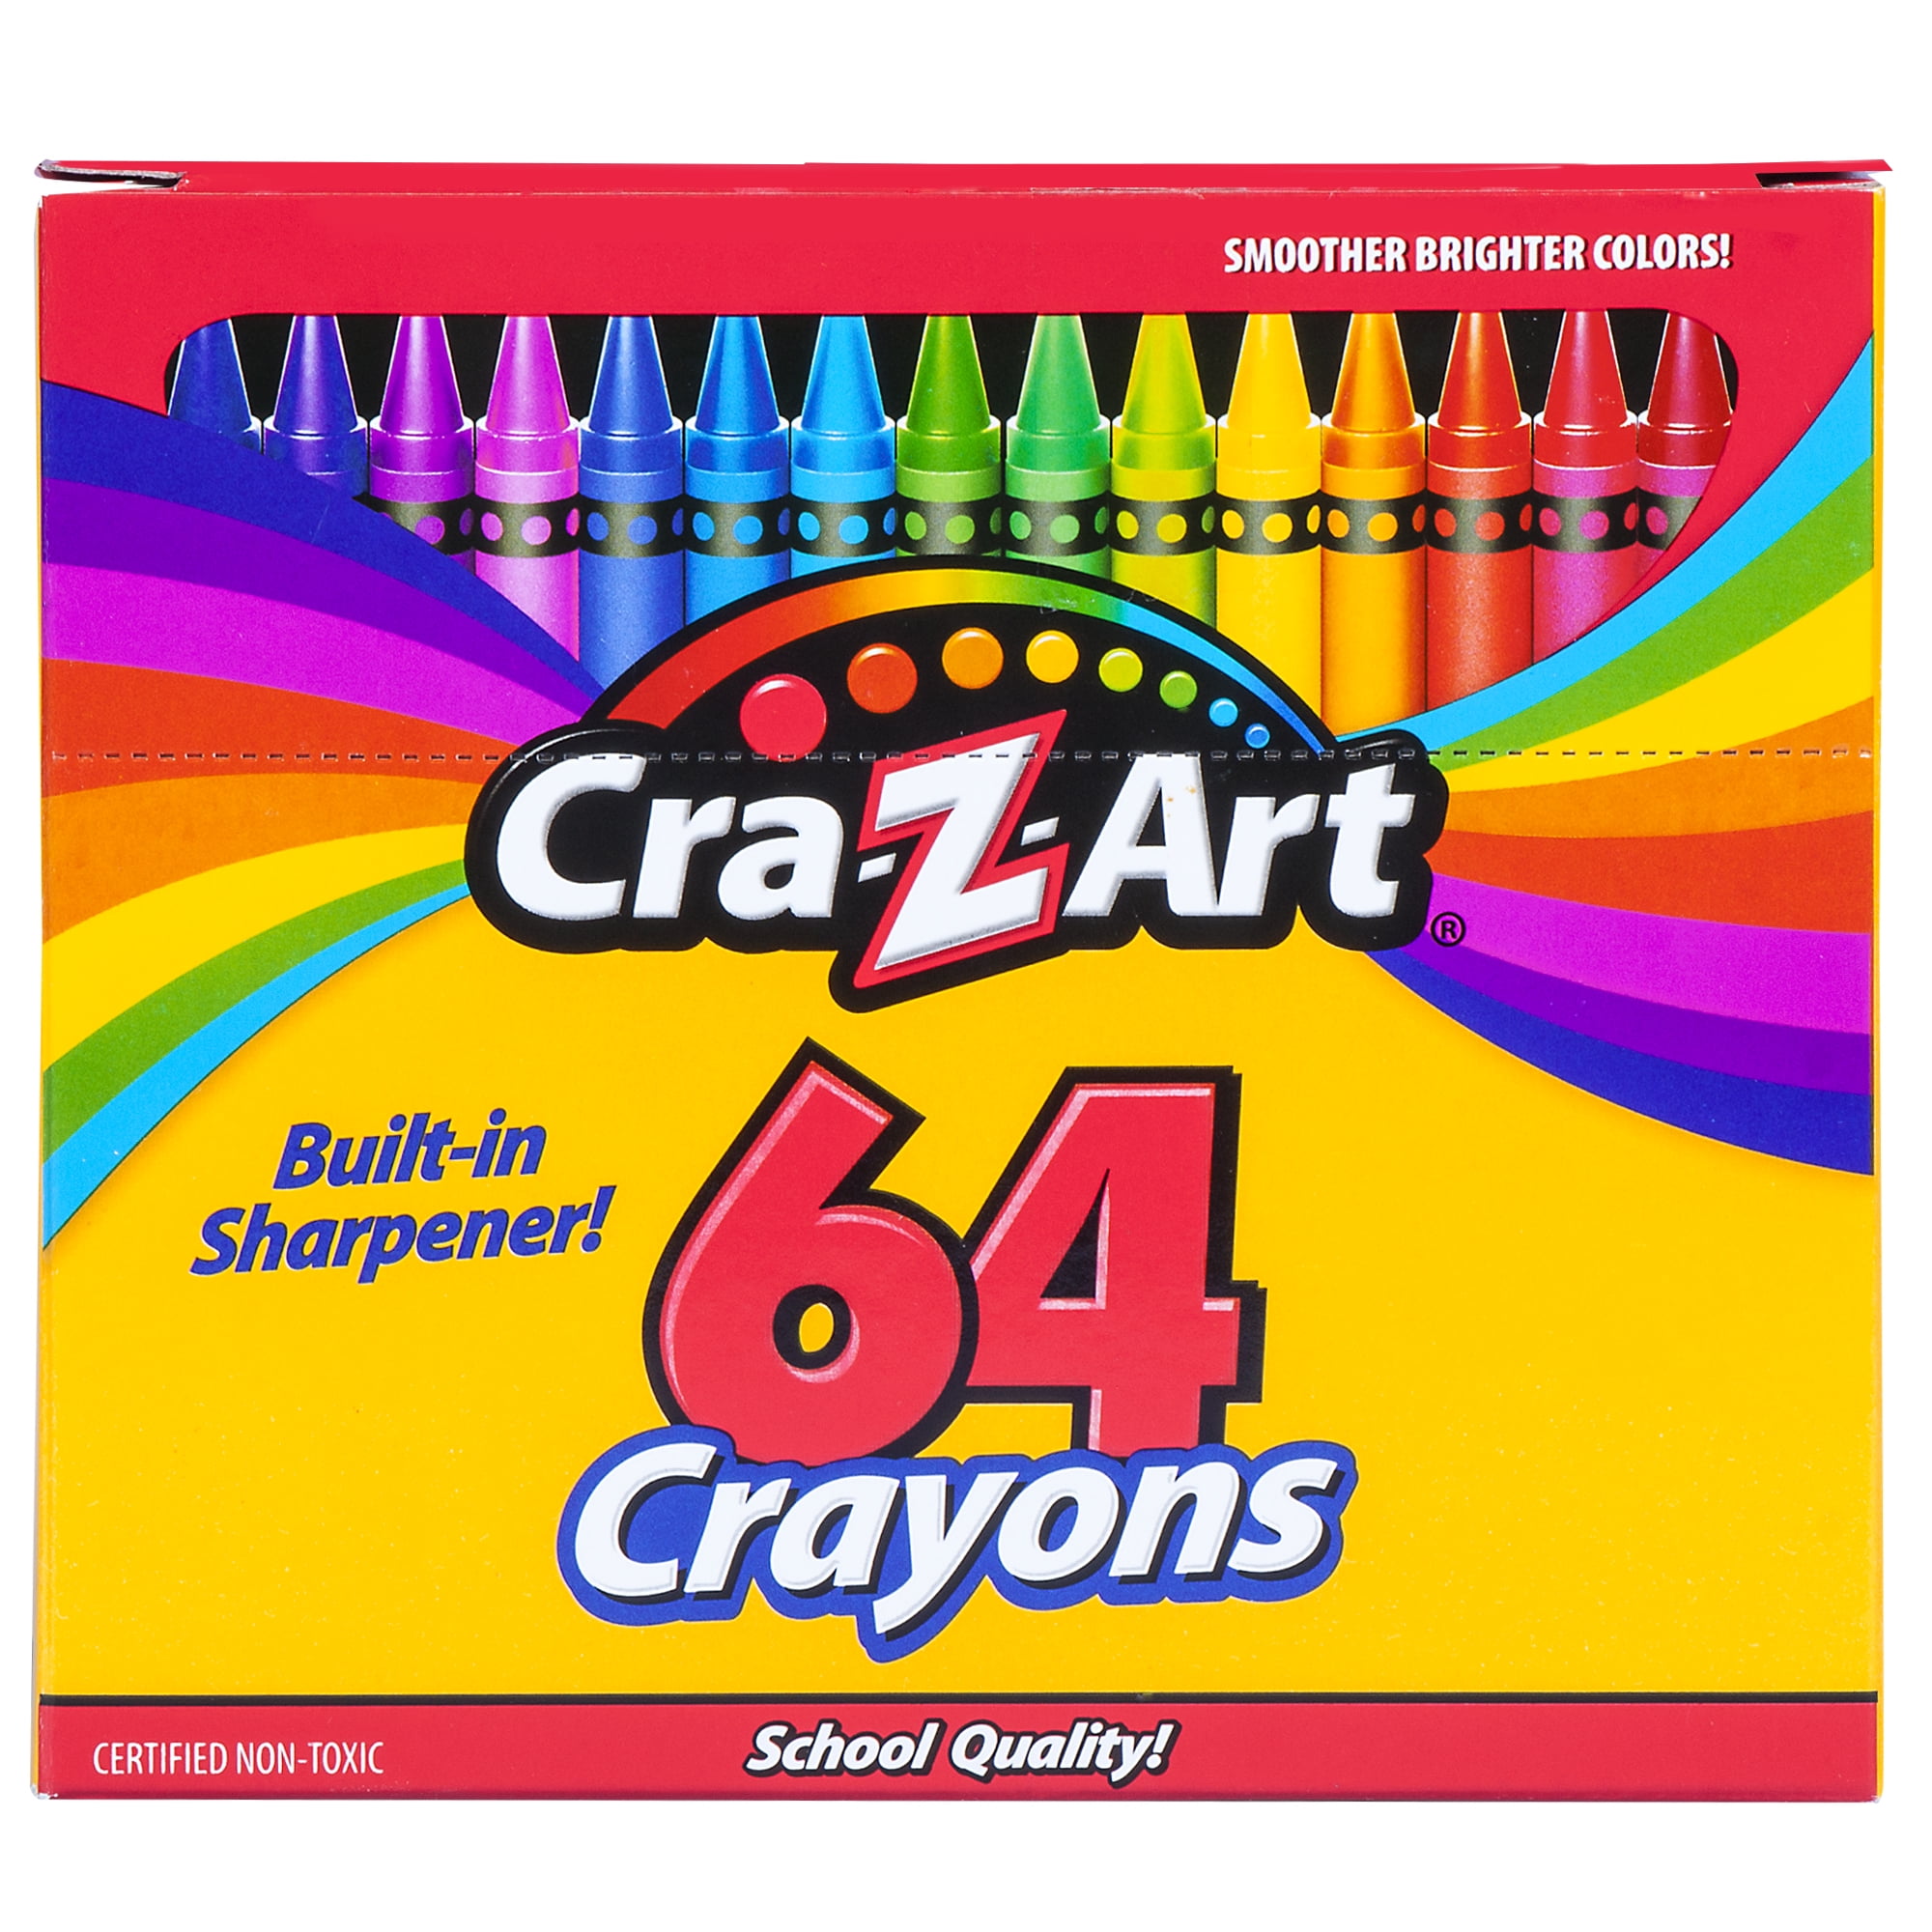 Cra-Z-Art Classic Crayons Bulk Pack with Built-in Sharpener, 64 Count